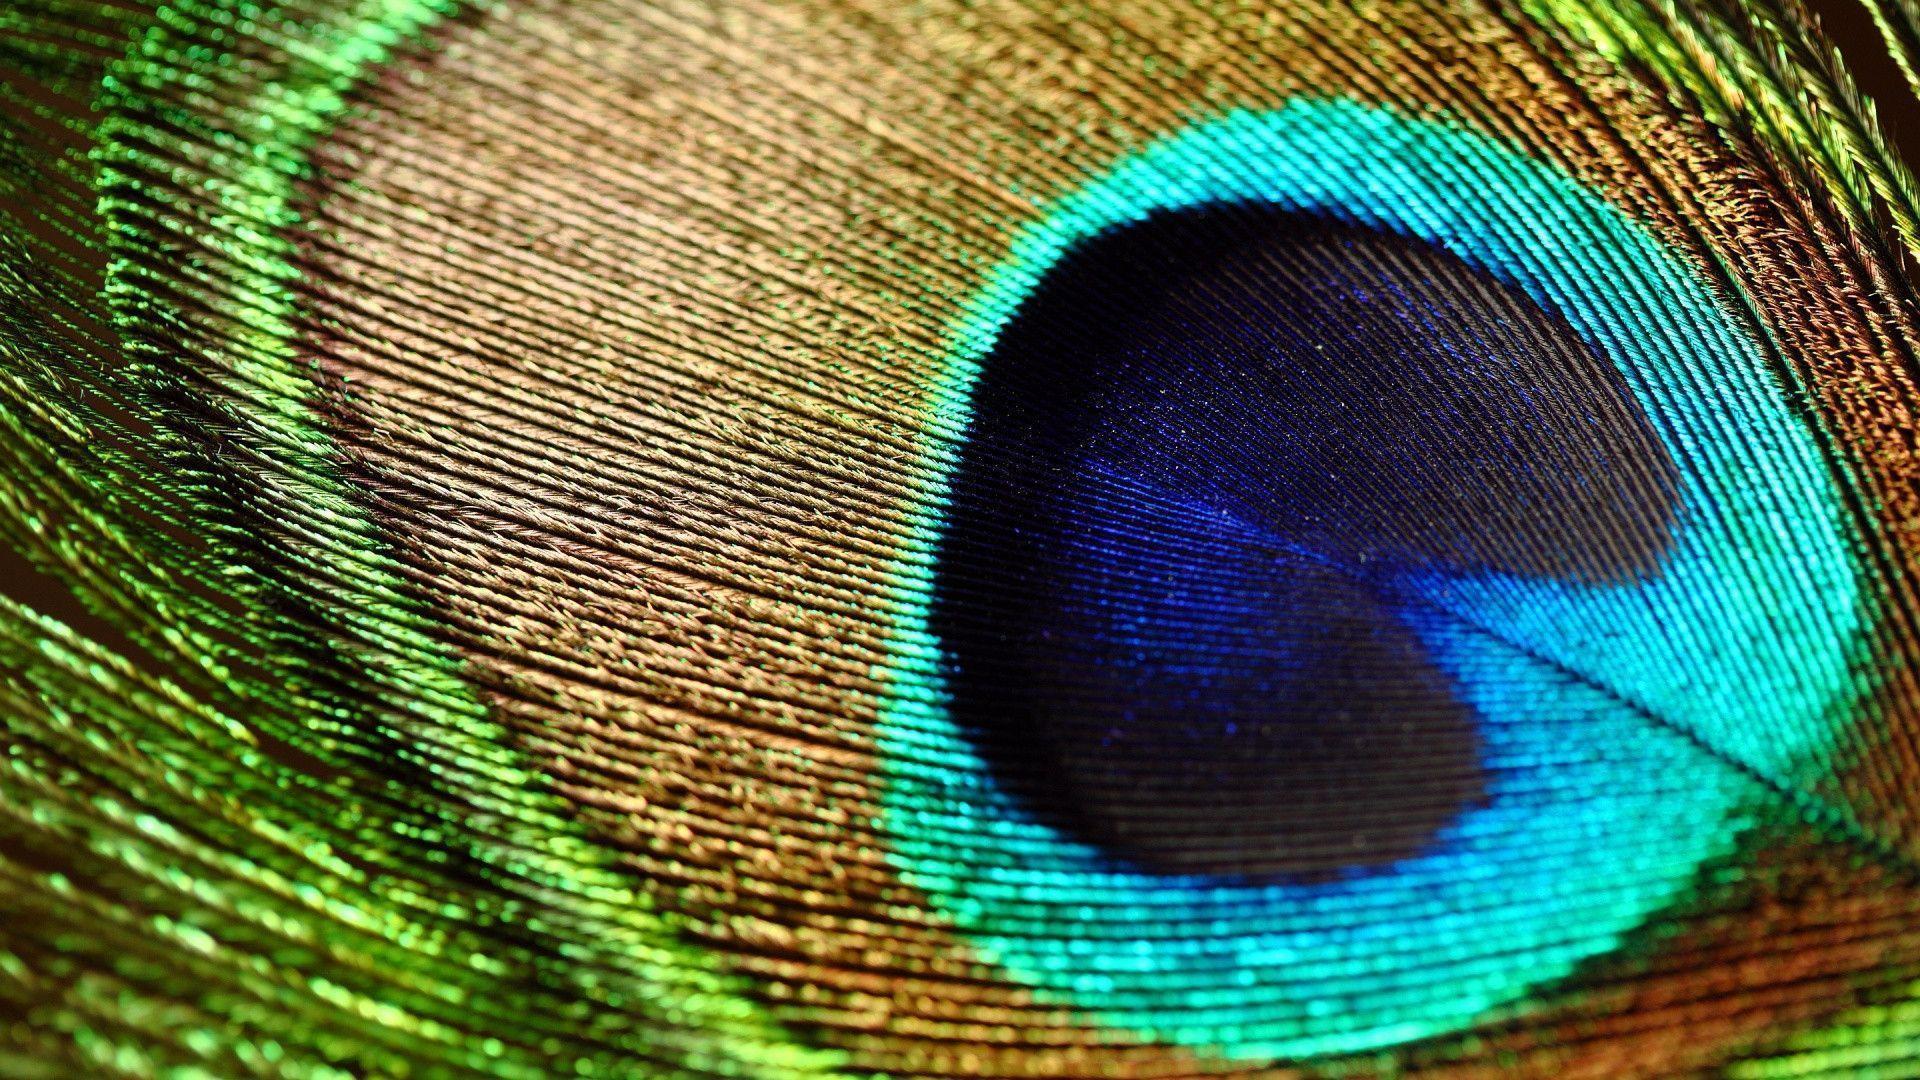 Wallpaper For > Purple Peacock Feather Wallpaper